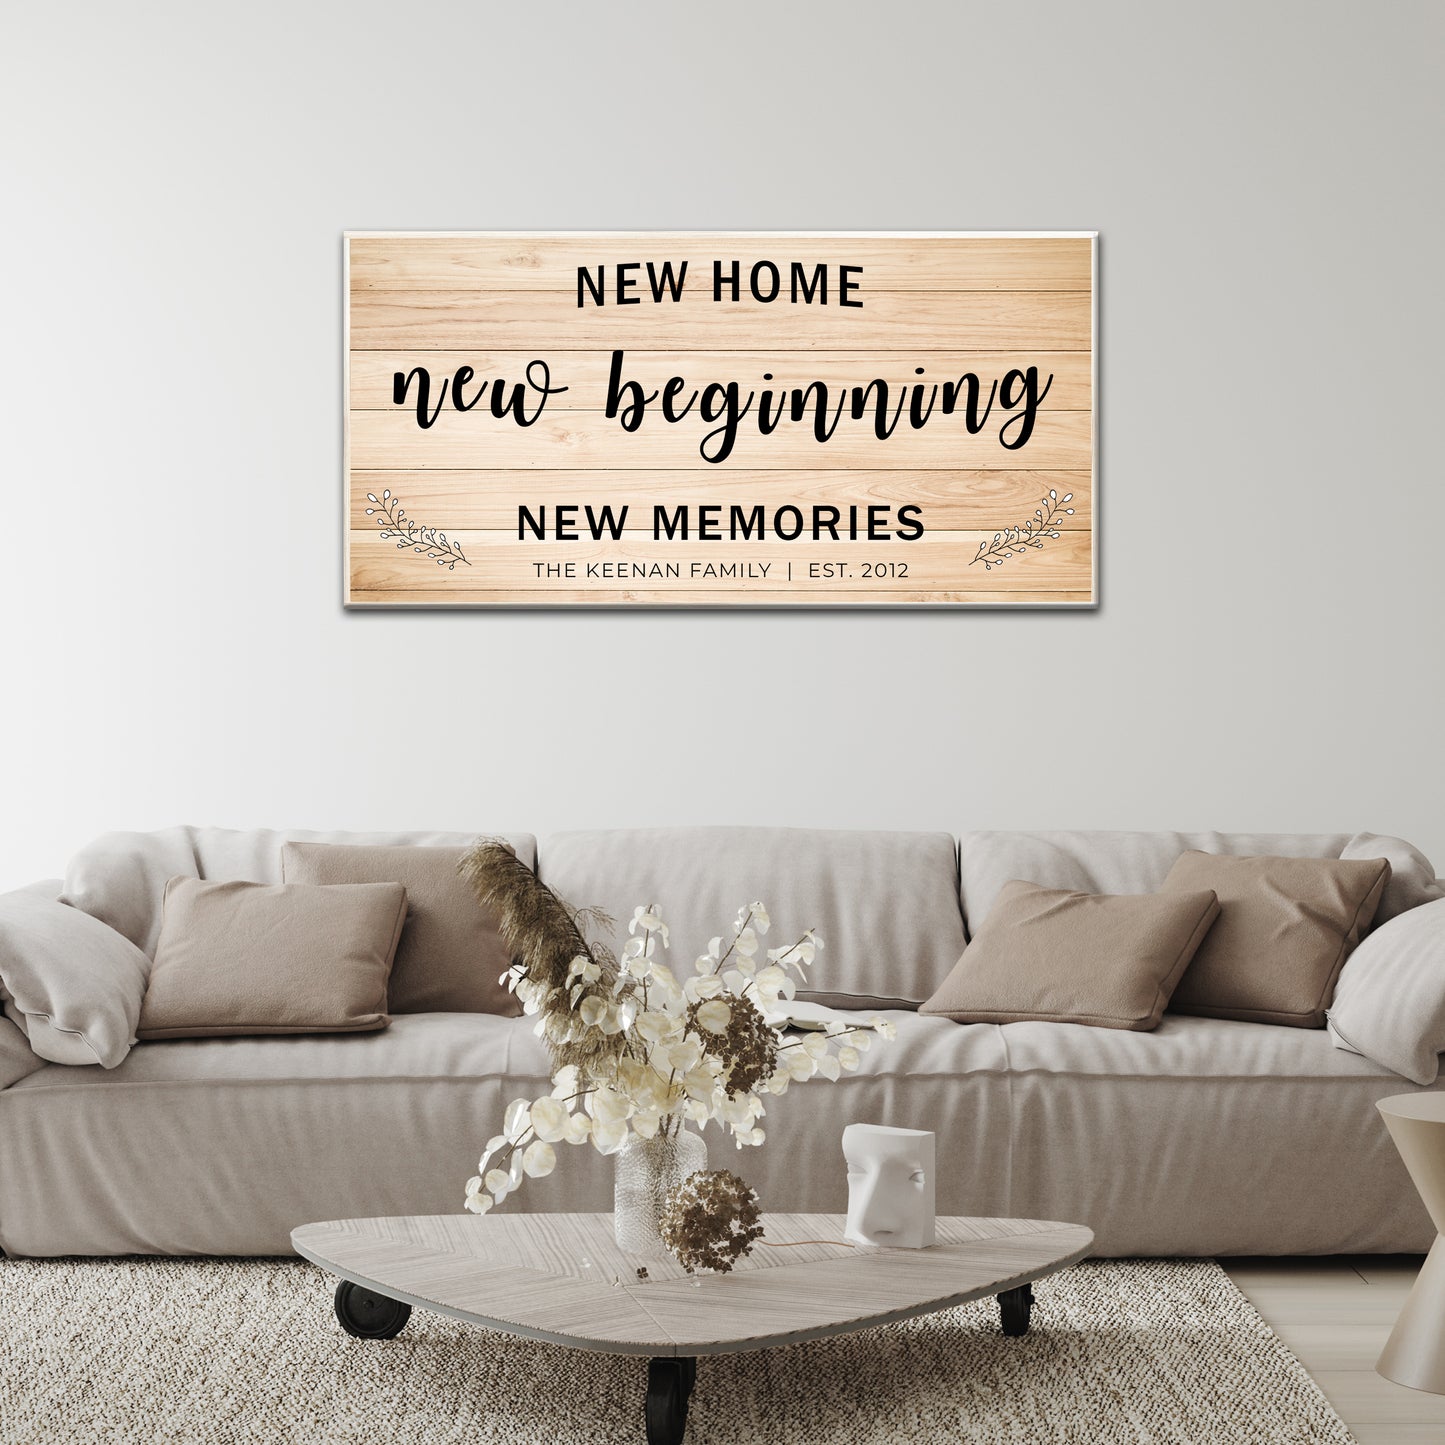 New Home, New Beginning Sign Style 2 - Image by Tailored Canvases